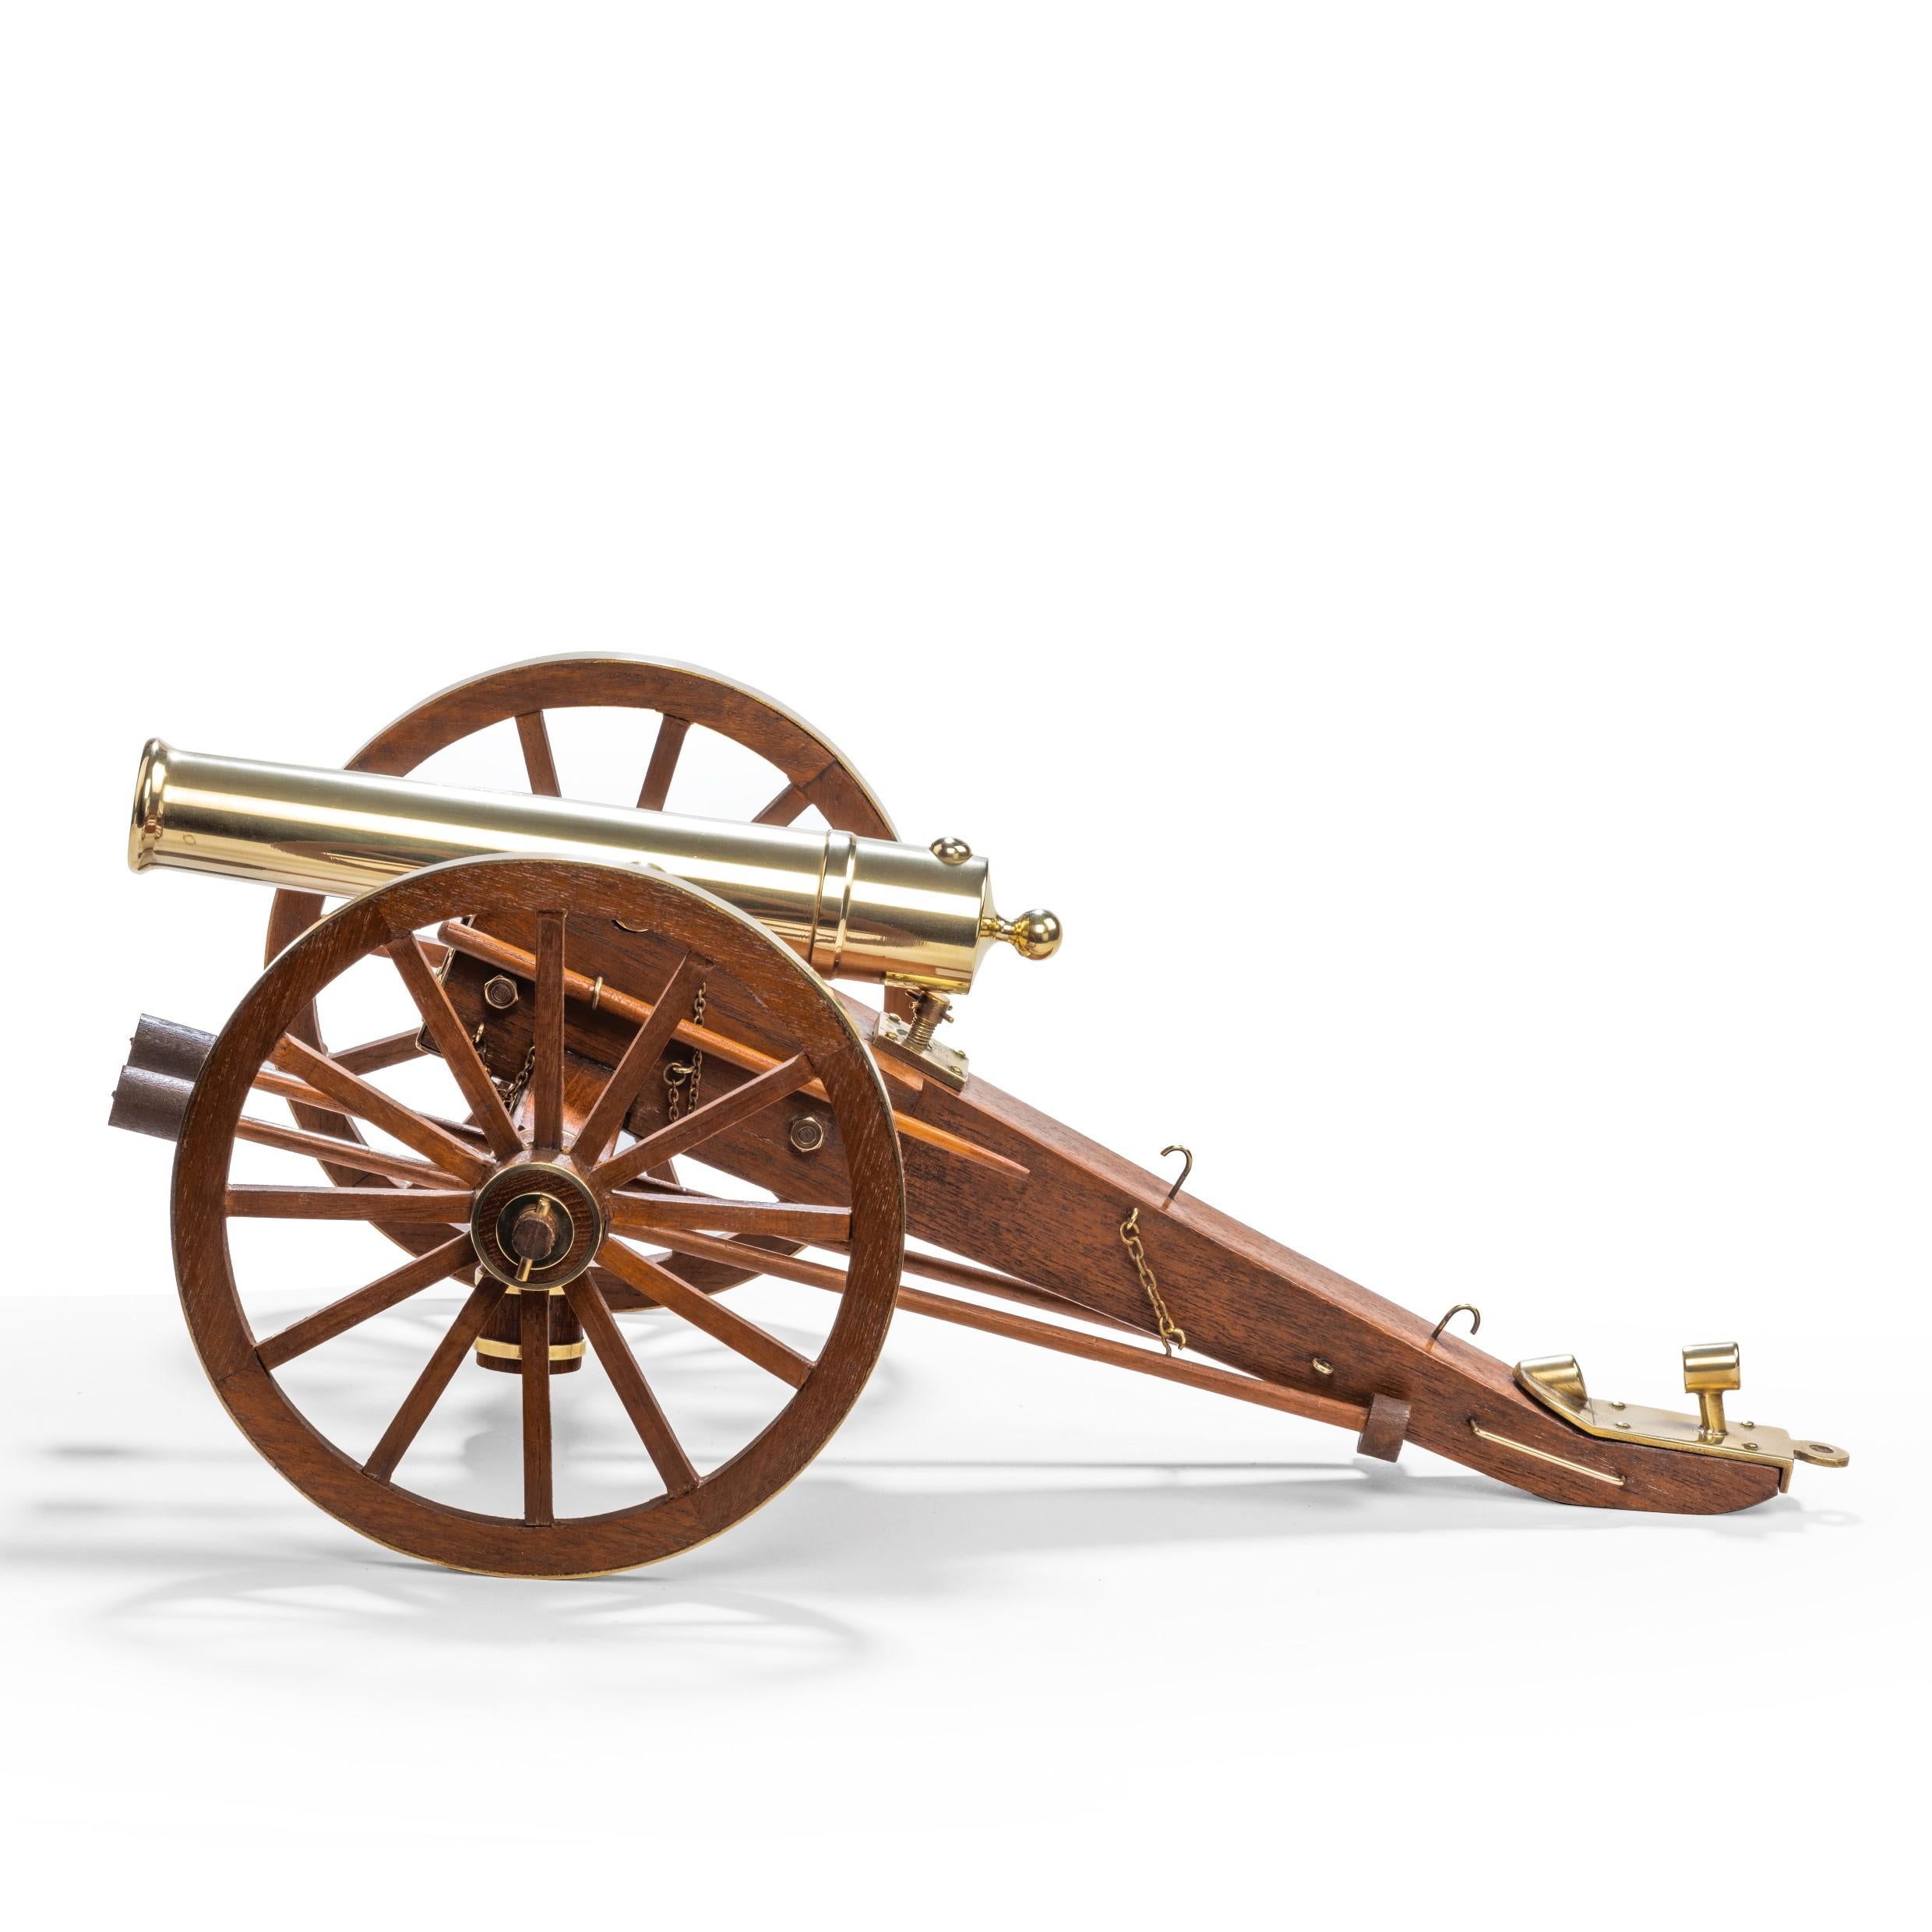 Dockyard built teak and brass field cannon, with a brass barrel set on a brass-bound carriage with large wheels and a brass-bound bucket, swabs and ramrods to scale, fine quality. English, circa 1930.
 